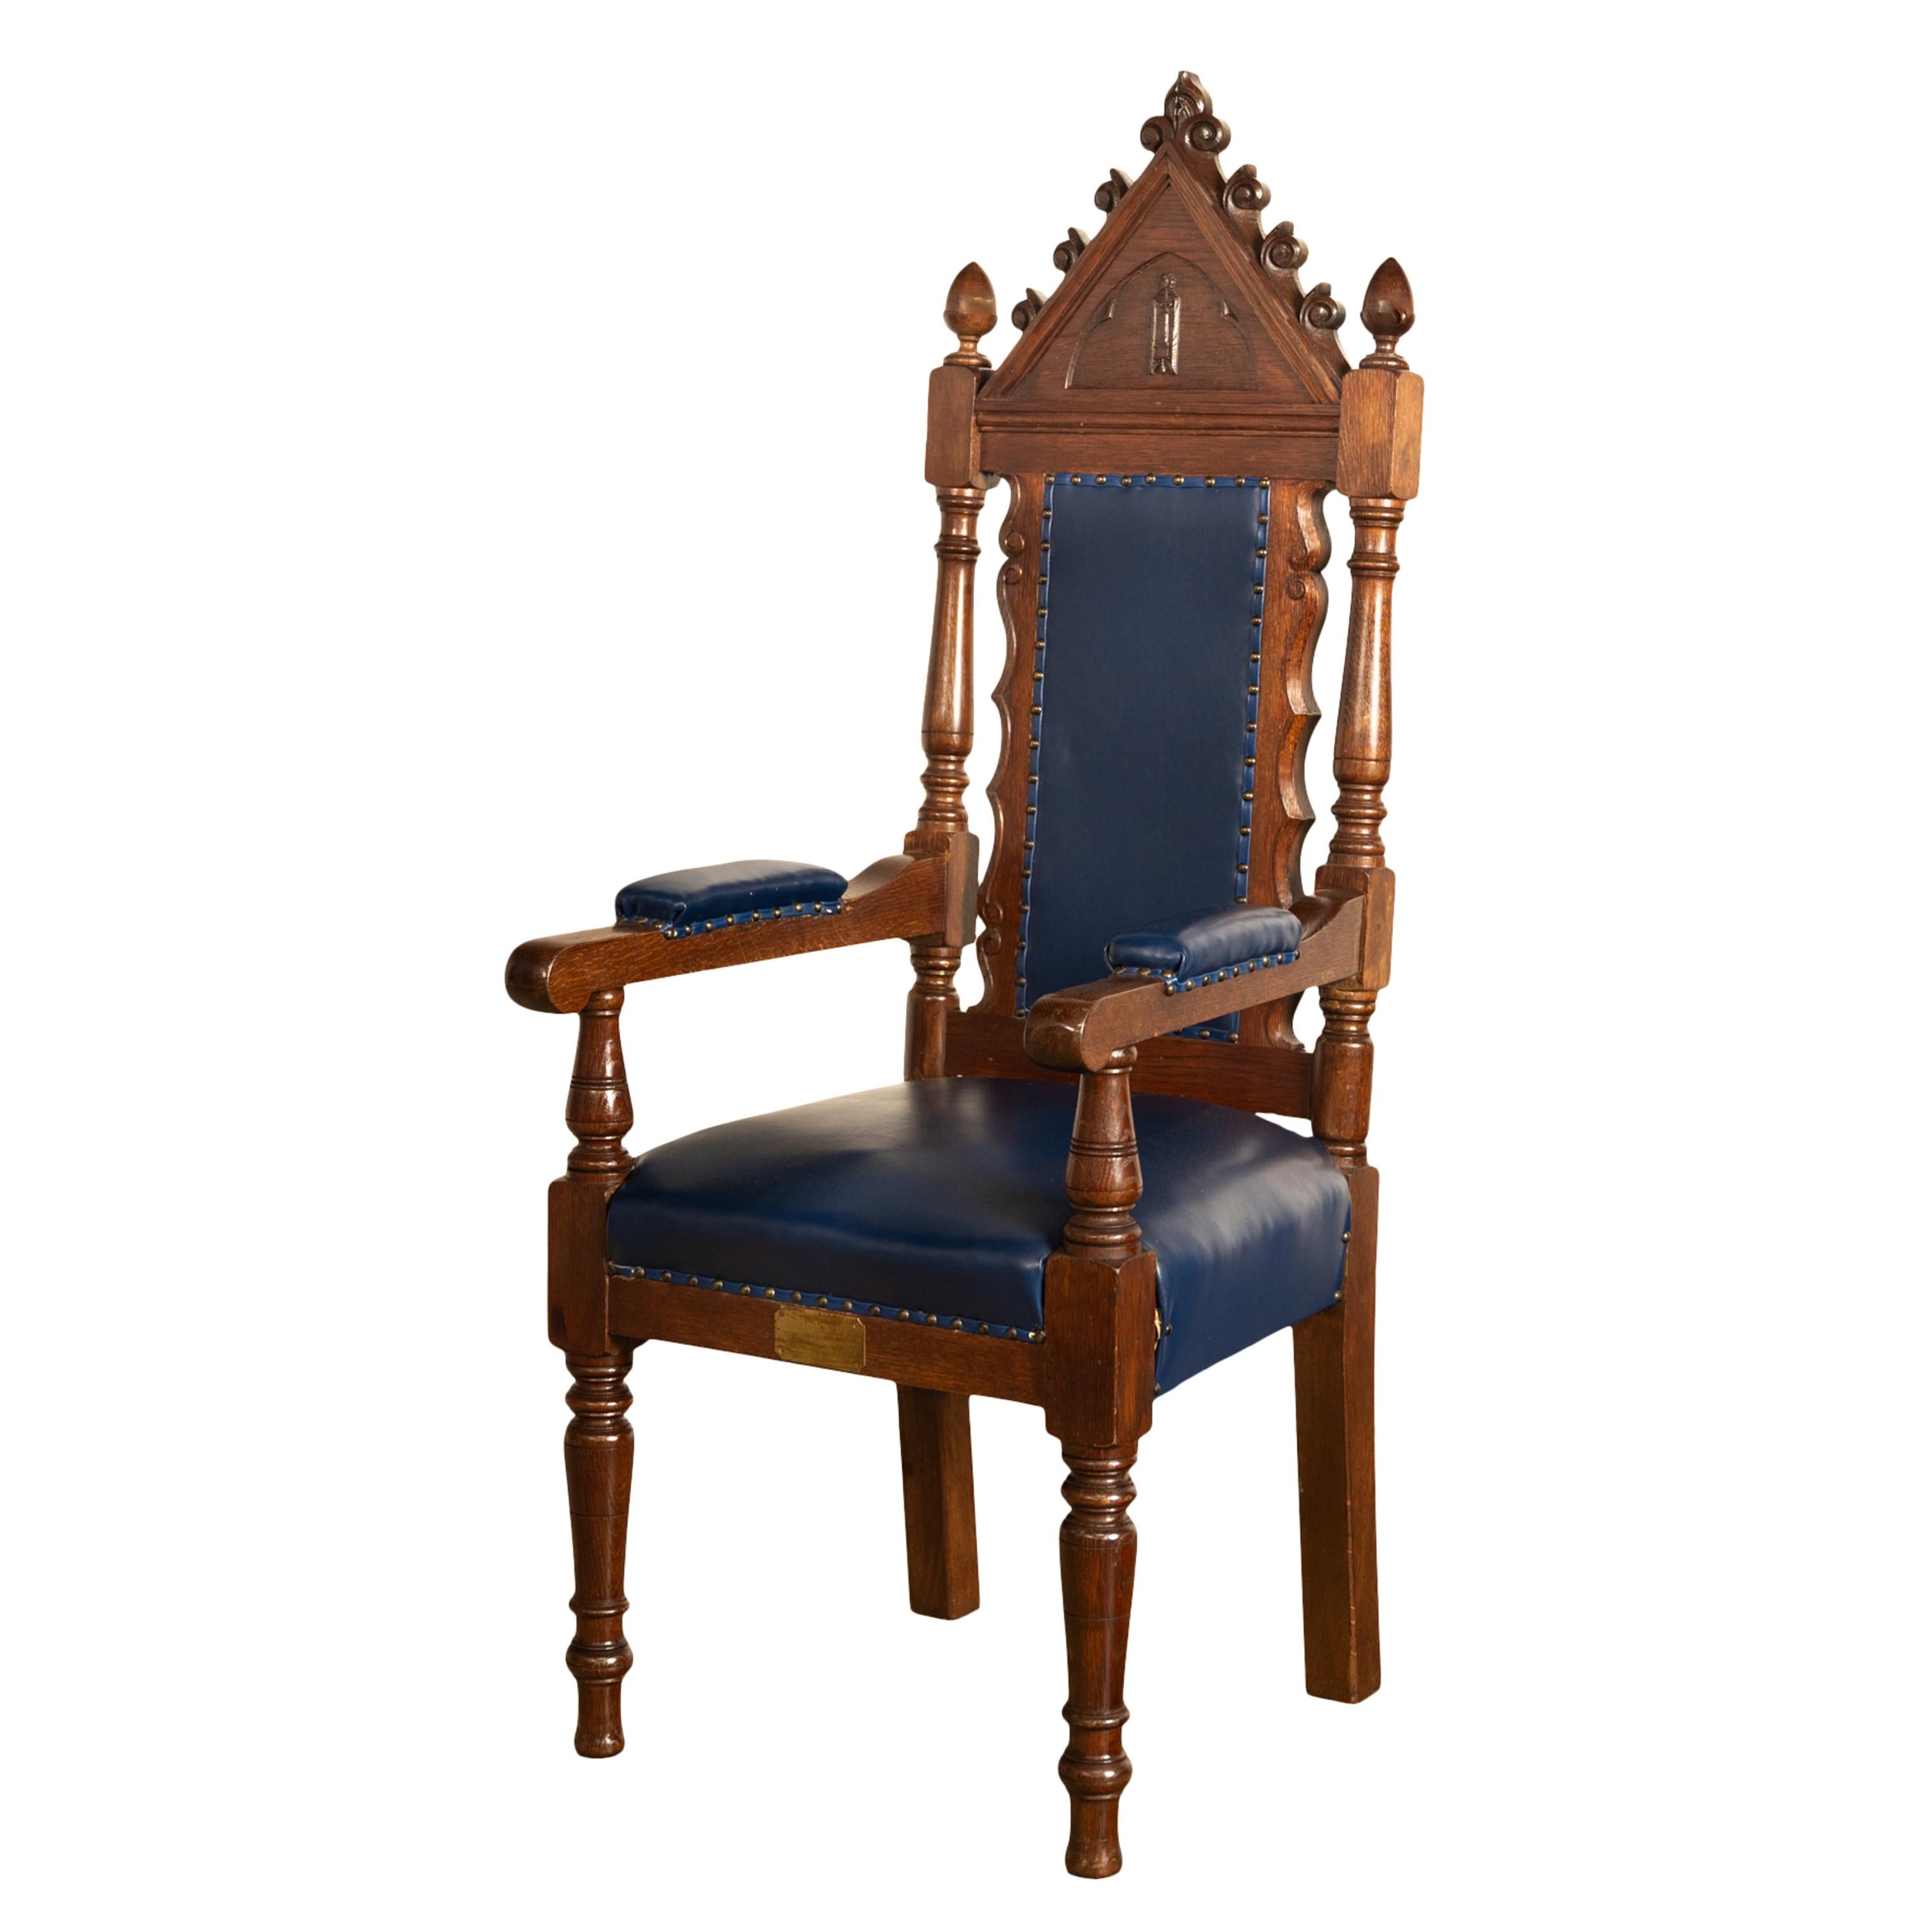 Antique Set of 5 Gothic Revival Irish Masonic Oak & Leather Throne Chairs 1900 For Sale 4